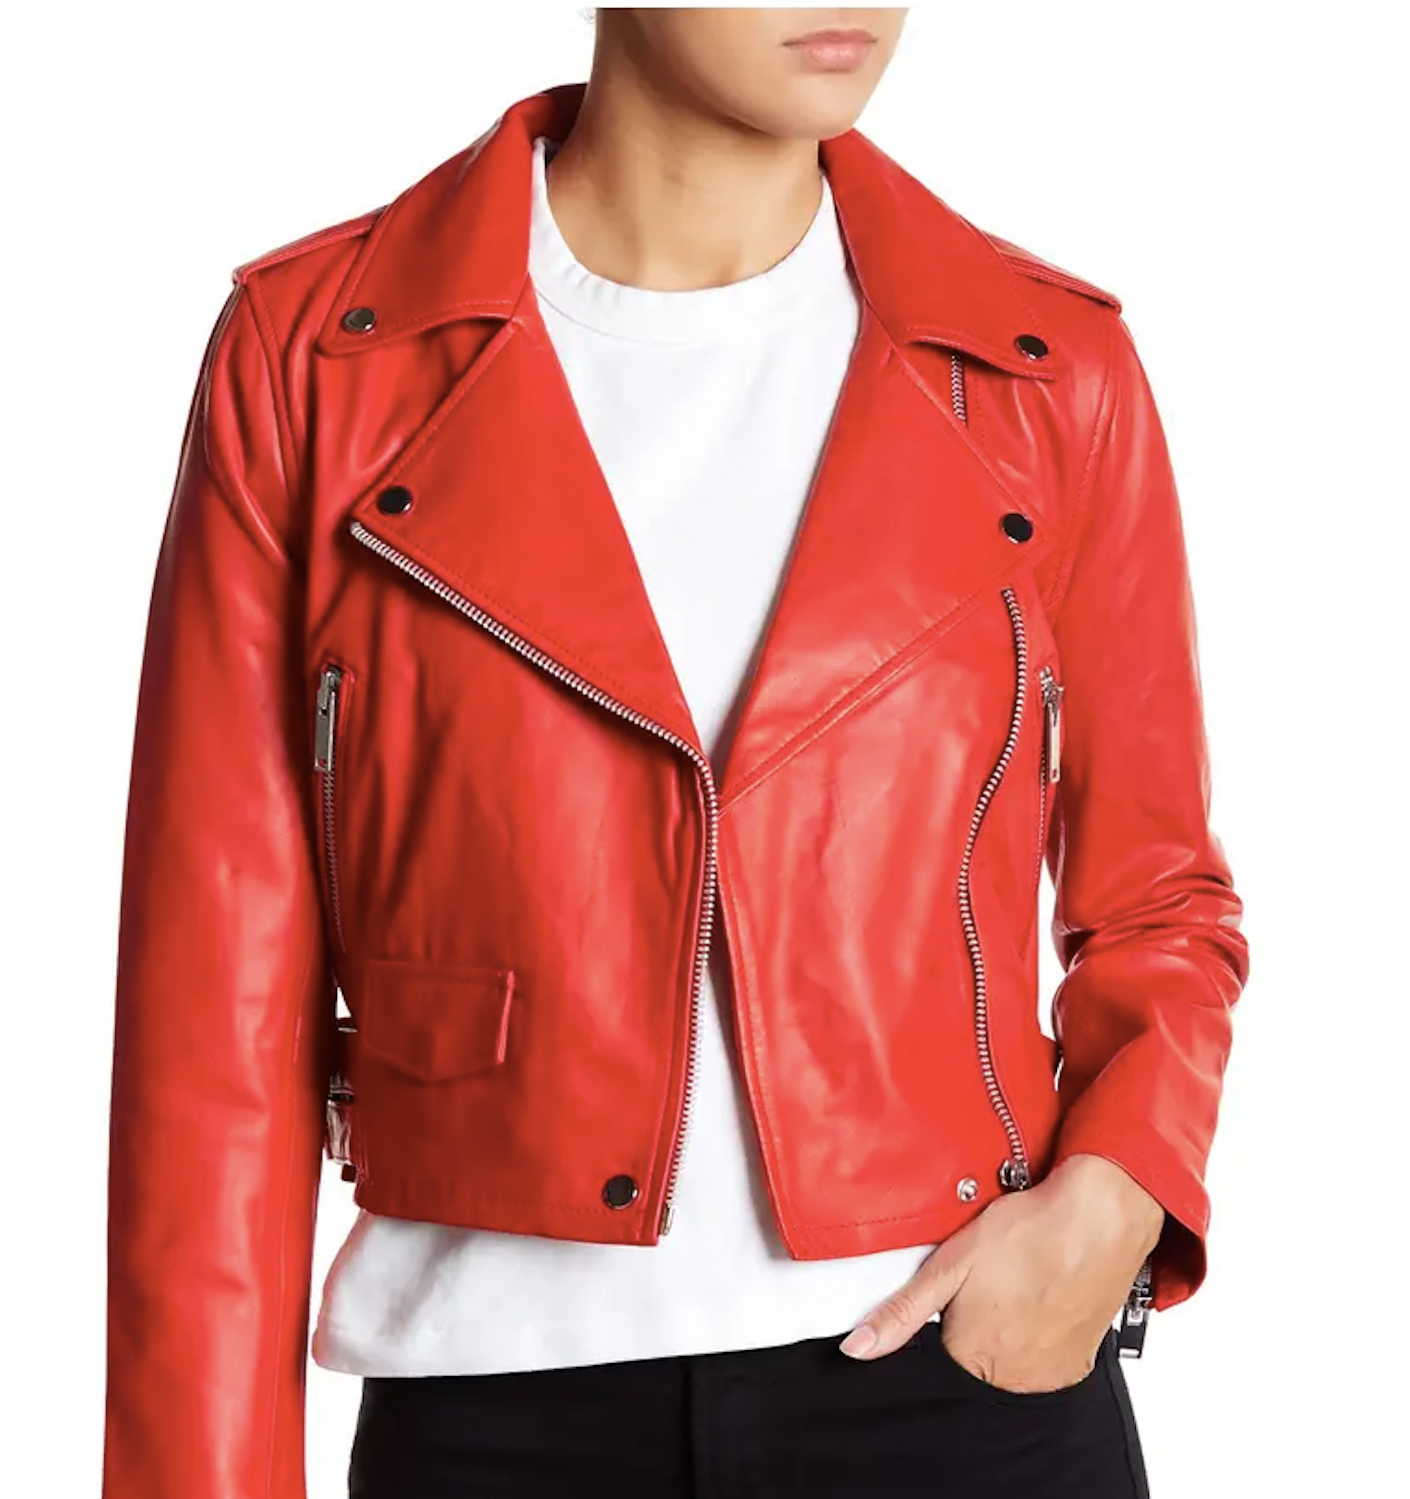 A person wearing a white t shirt and black jeans also wears a bright red leather moto jacket with prominent lapels.